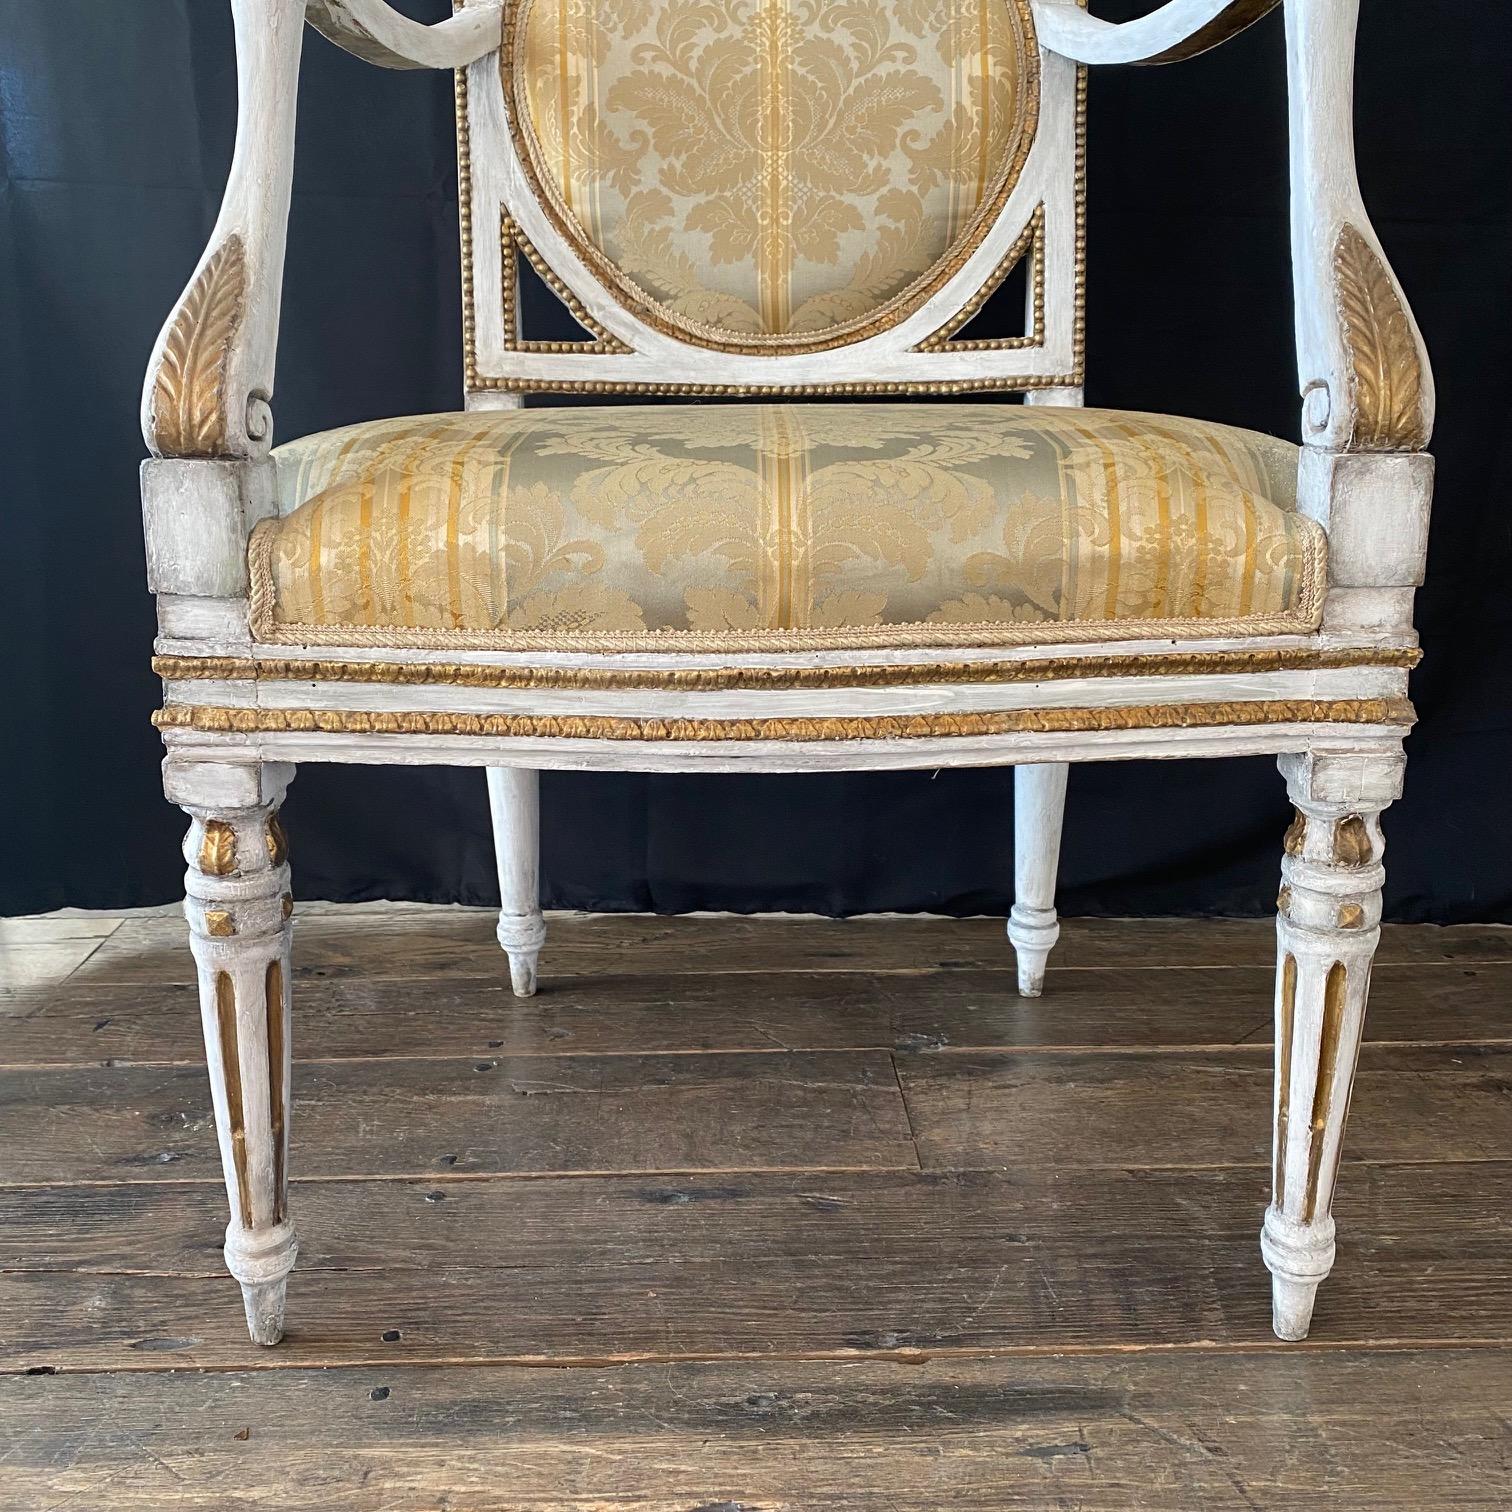 Elegant and classic 18th century authentic Italian neoclassical pair of armchairs or fauteuils from a salon set (matching sofa available). Upholstered in a stunning neutral raw-silk with original paint. In wonderful shape for its age (a few minor